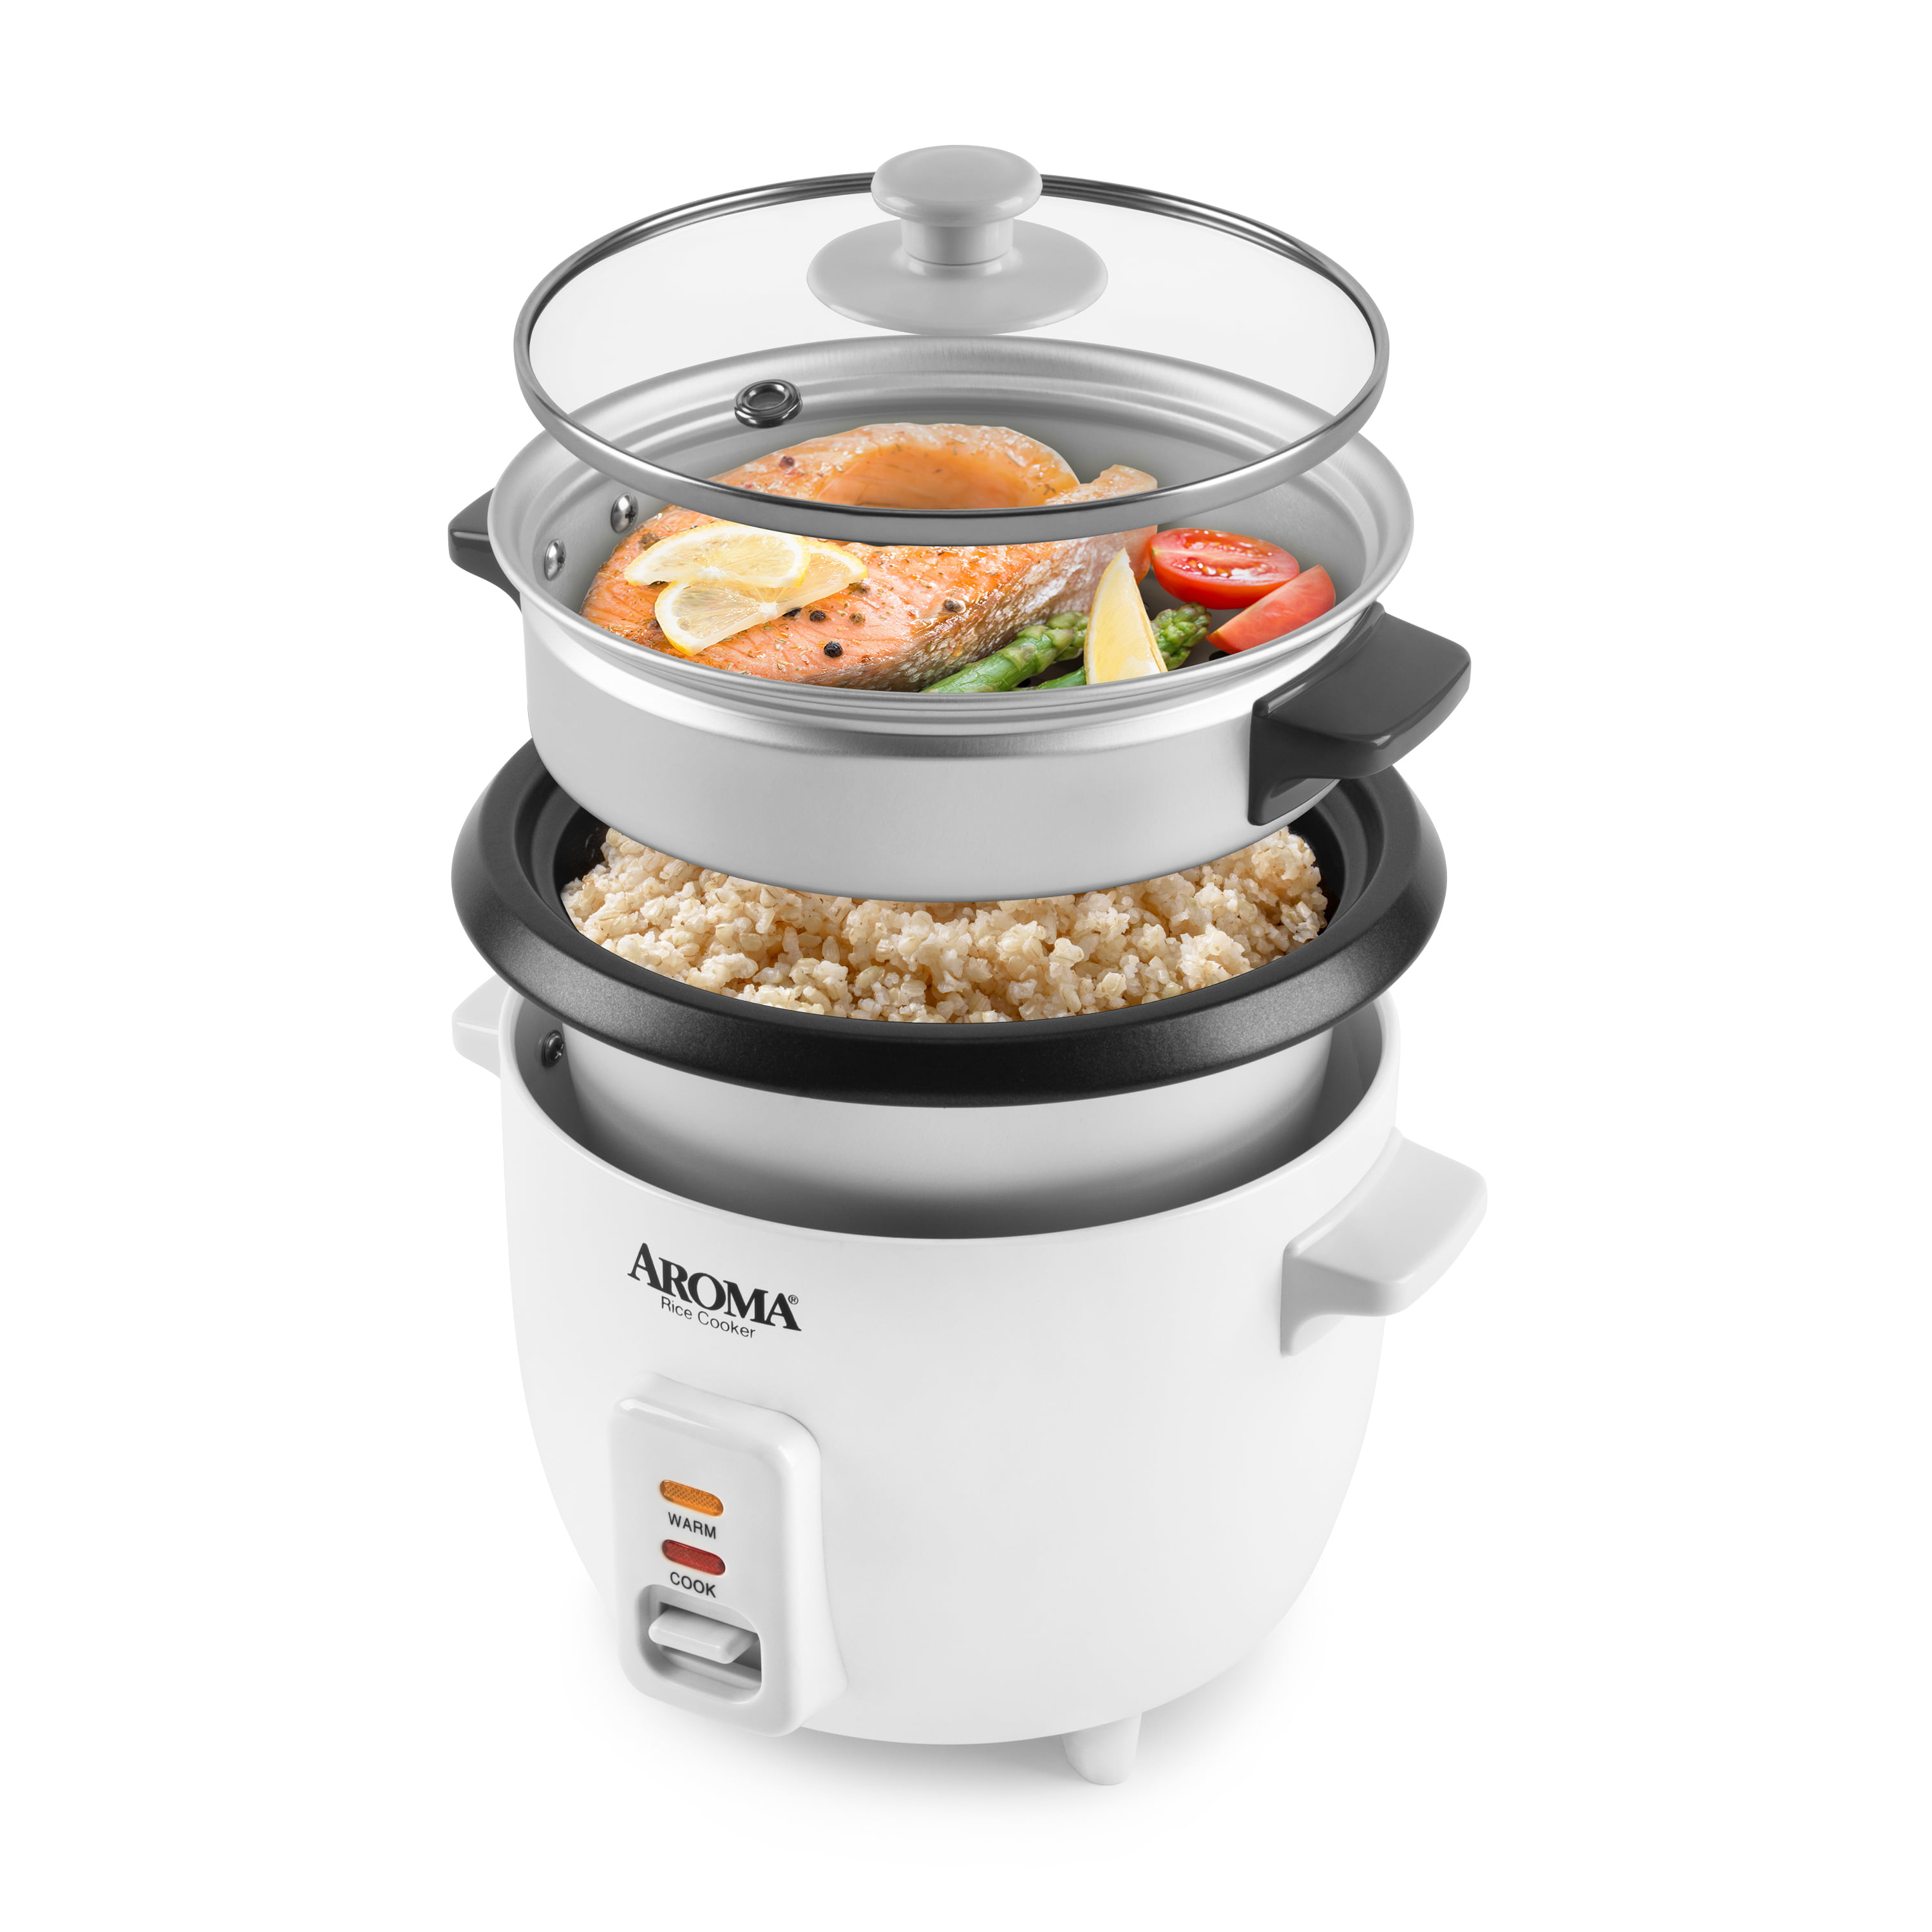 Aroma rice And Grain Cooker 6 Cups 1.5 QT for Sale in Joliet, IL - OfferUp